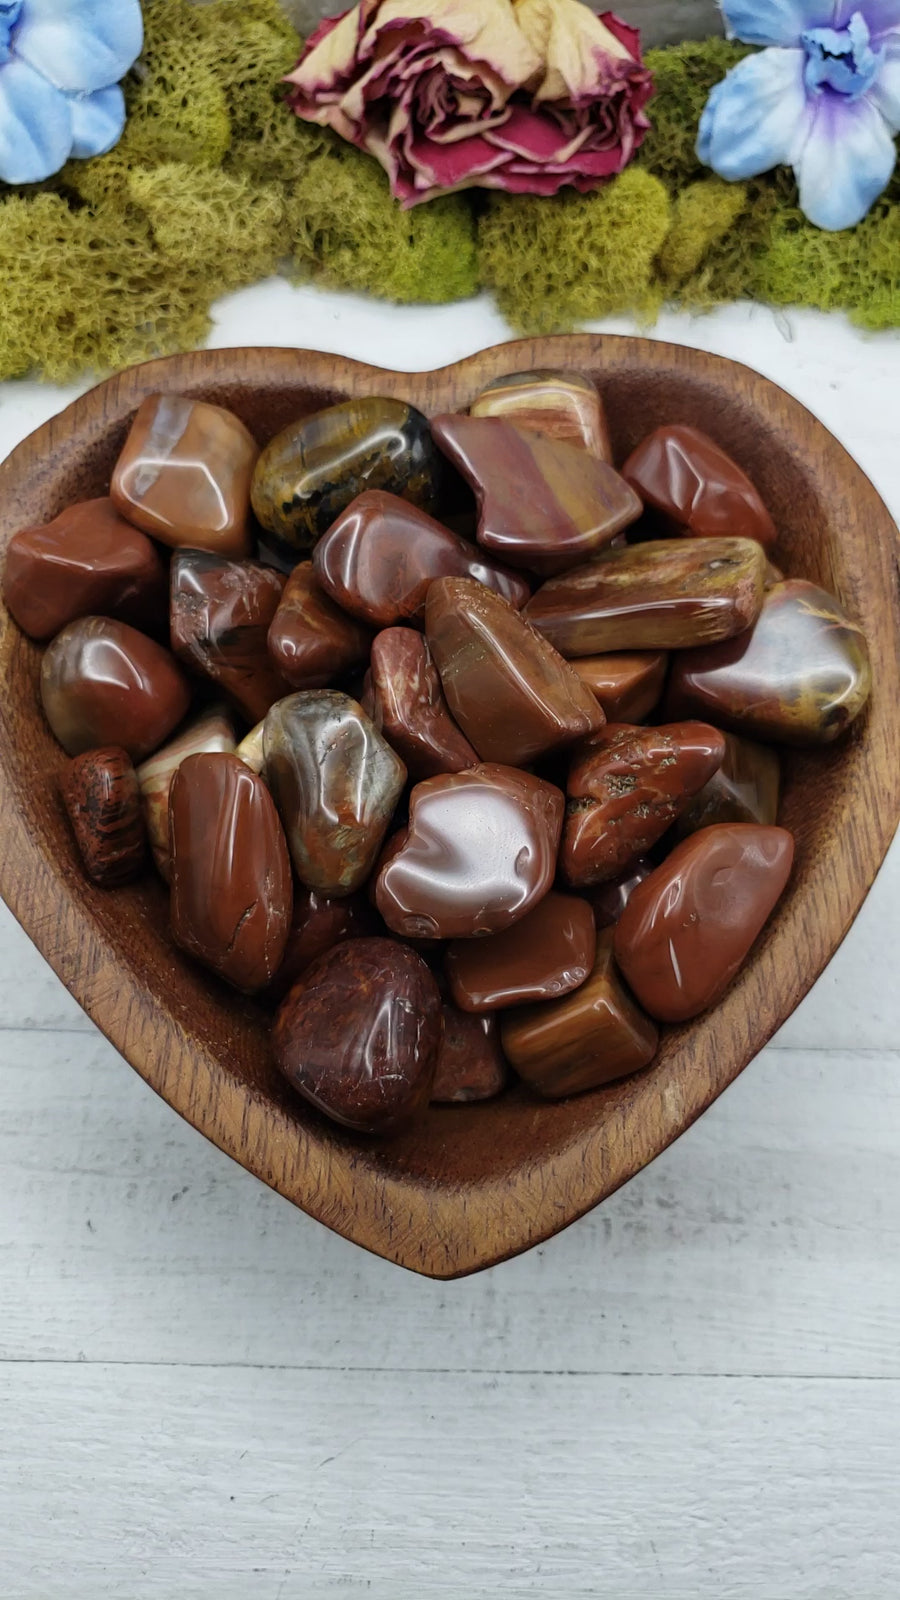 red agatized wood stone in heart-shaped bowl